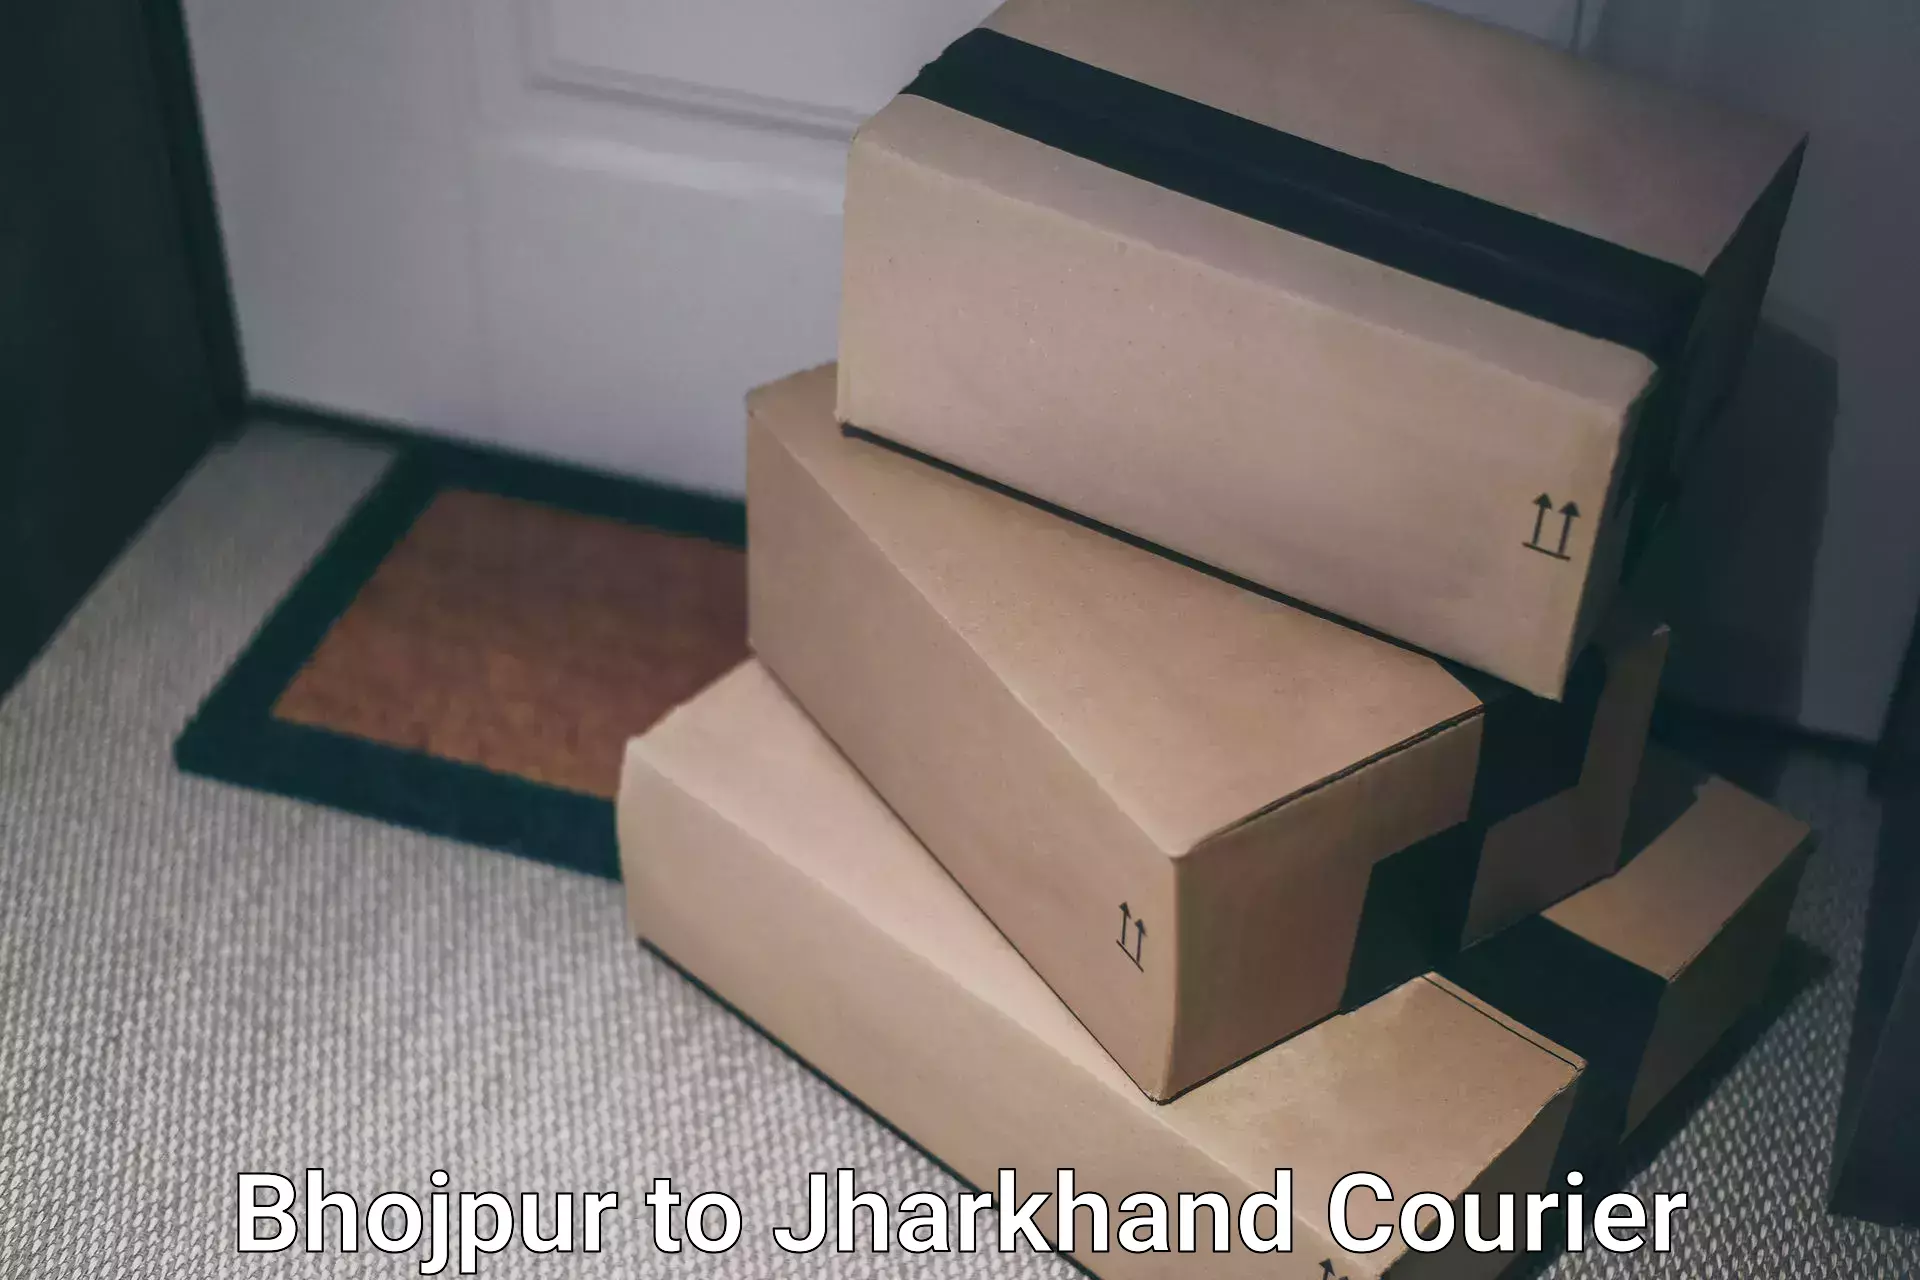 Lightweight parcel options Bhojpur to Jharkhand